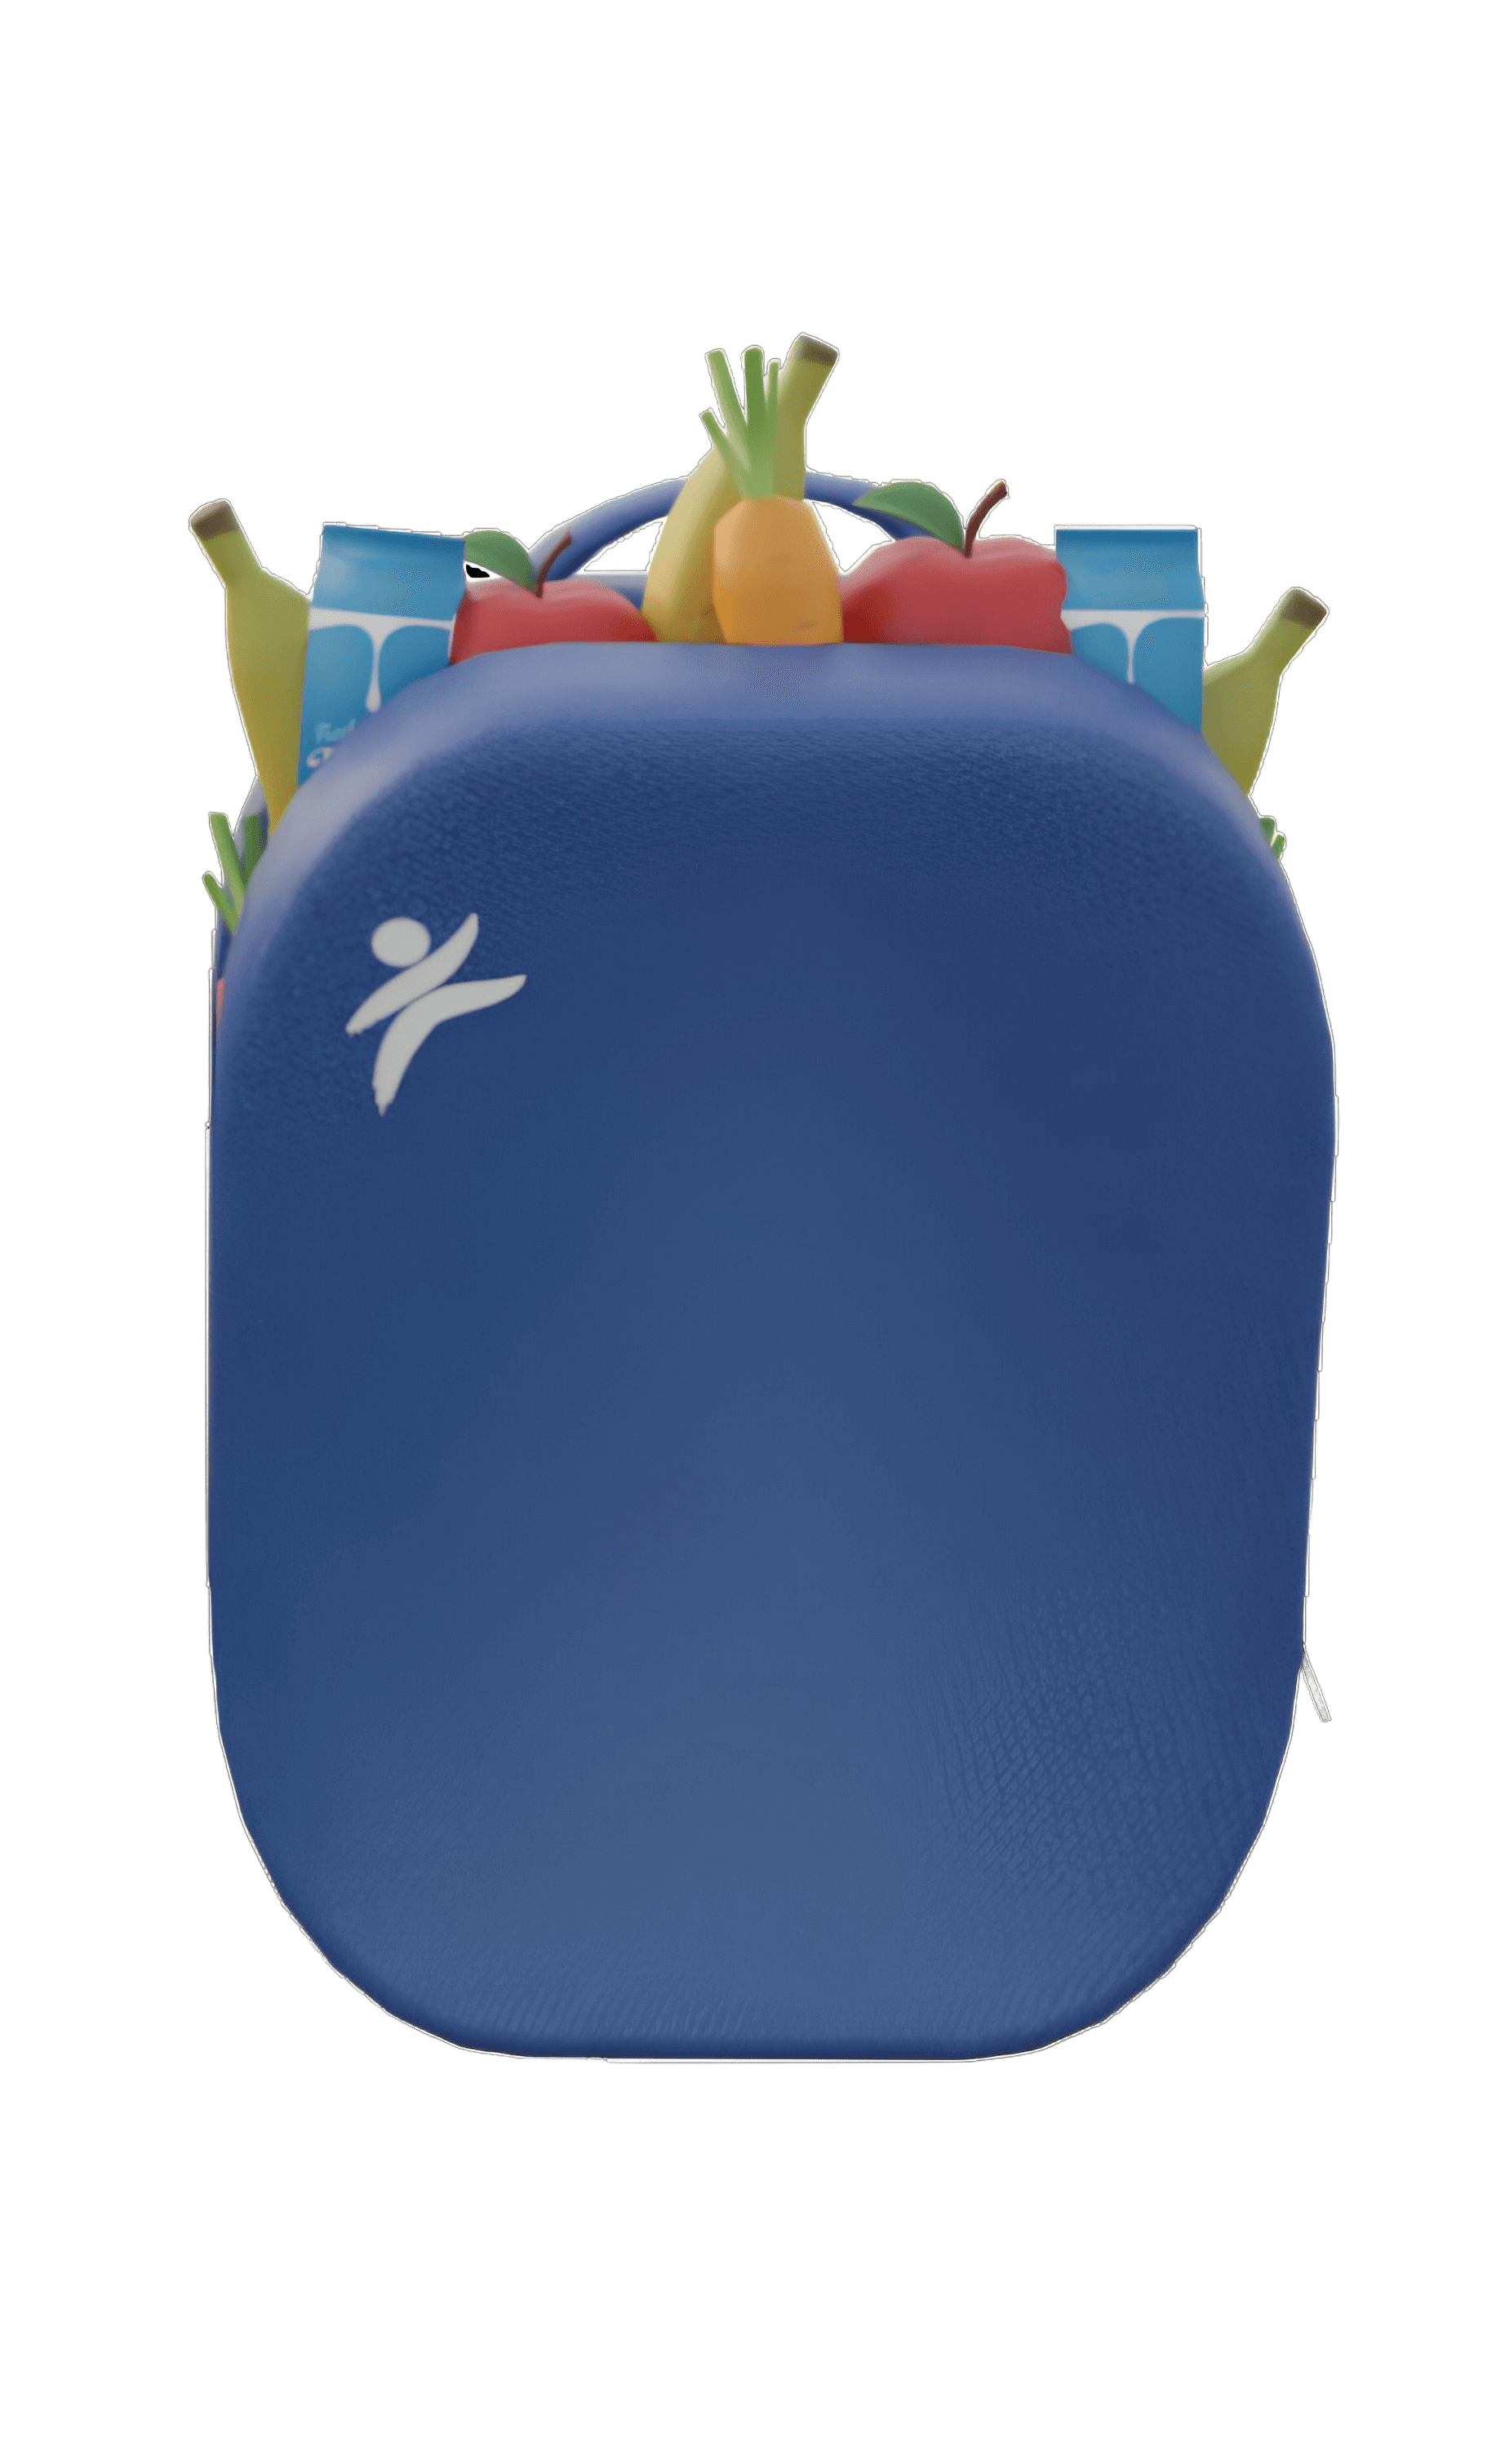 A blue backpack with the Compassion International logo. Fruit is coming out of the top of the pack.